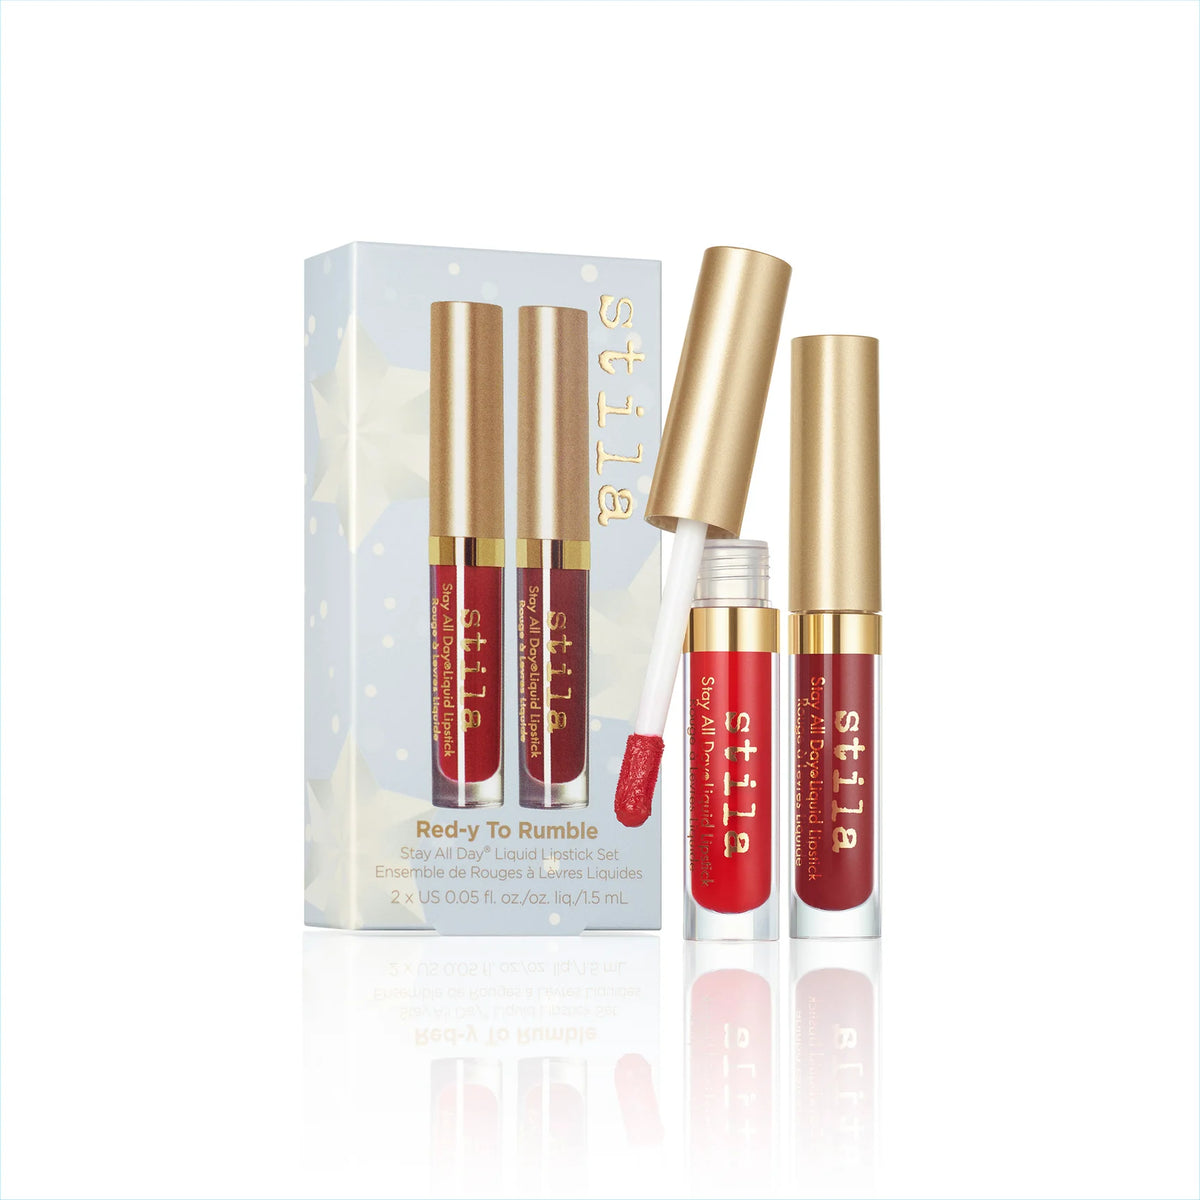 Red-y to Rumble Stay All Day Liquid Lipstick Set - Holiday 23